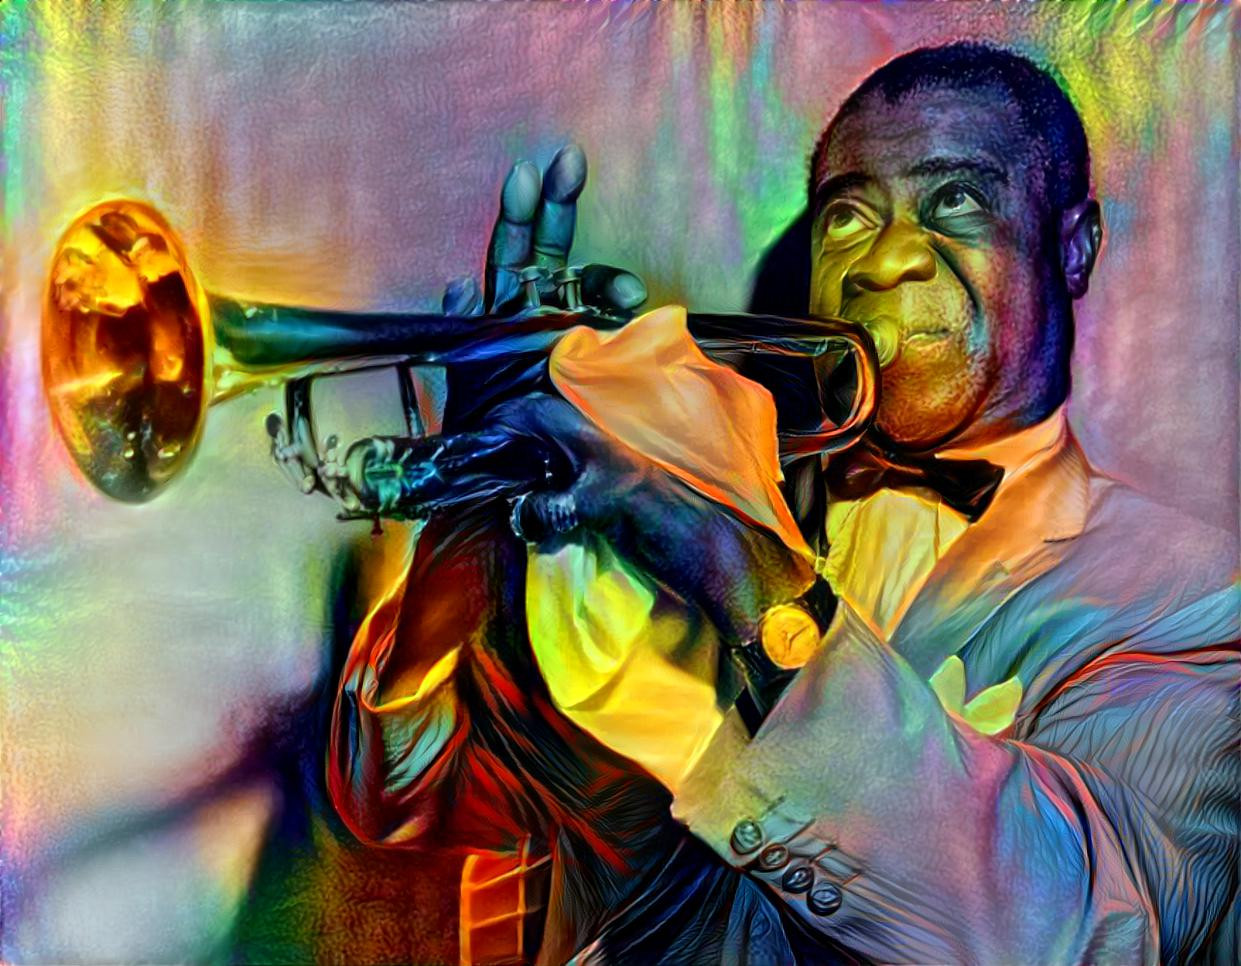 Louis Armstrong was a superstar trumpeter and sing